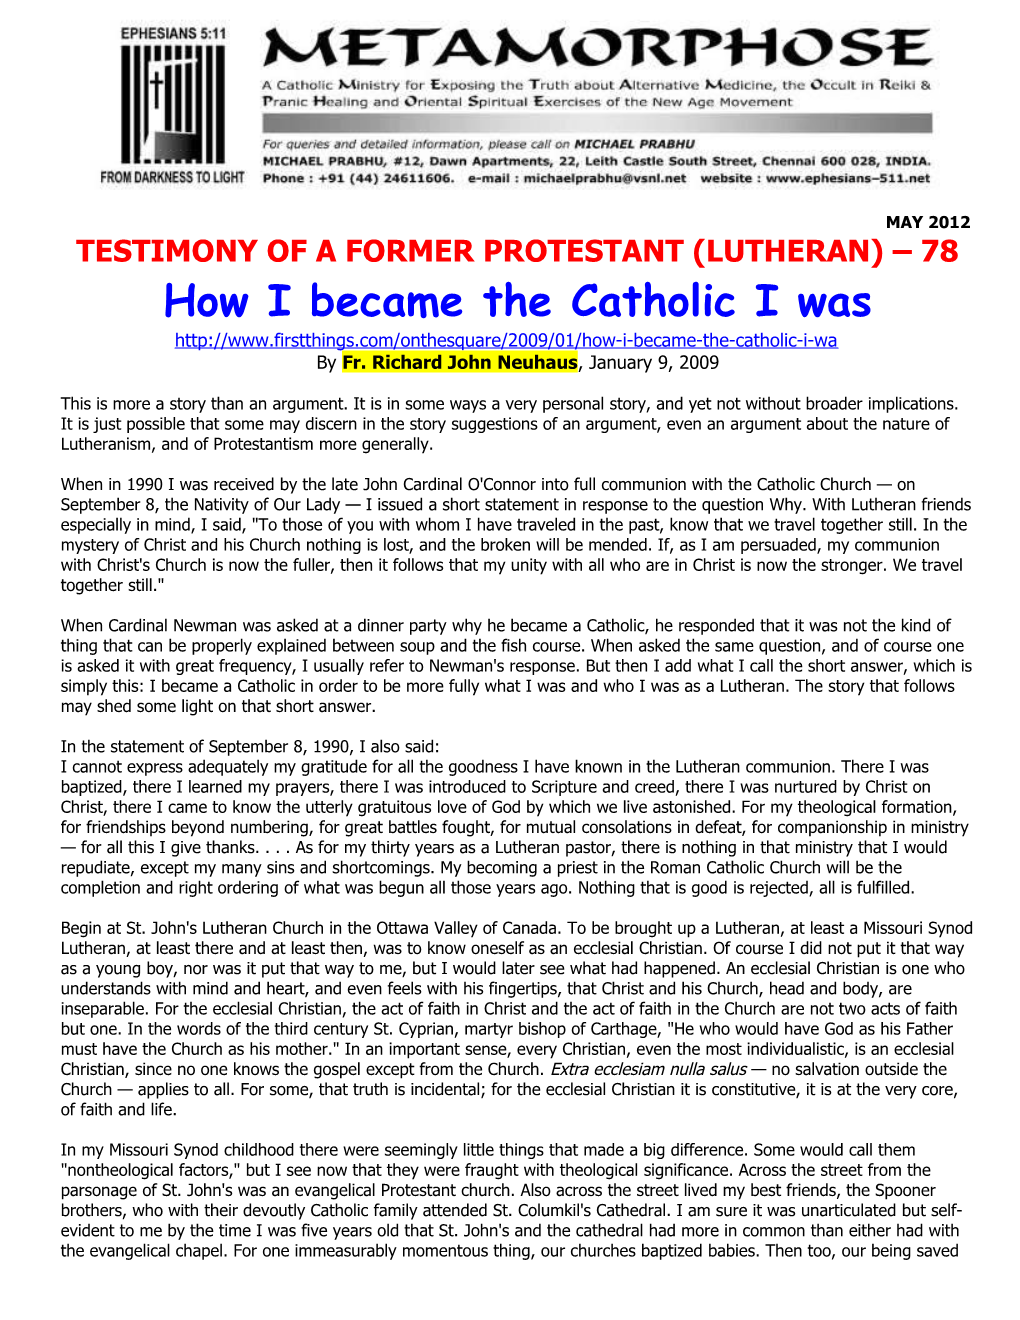 Testimony of a Former Protestant (Lutheran) 78